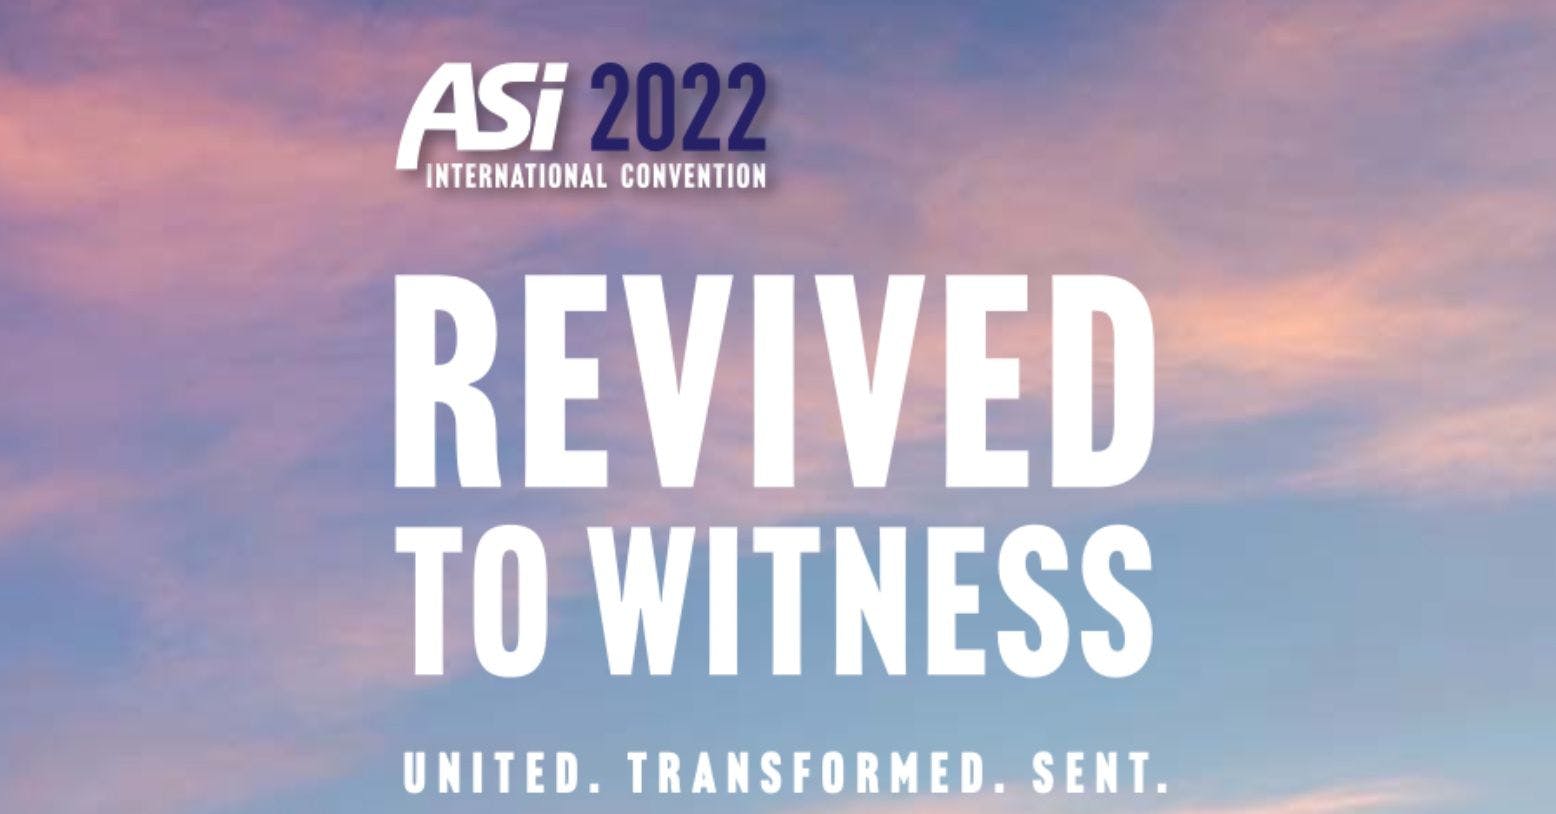 ASI Convention 2022: Revived to Witness